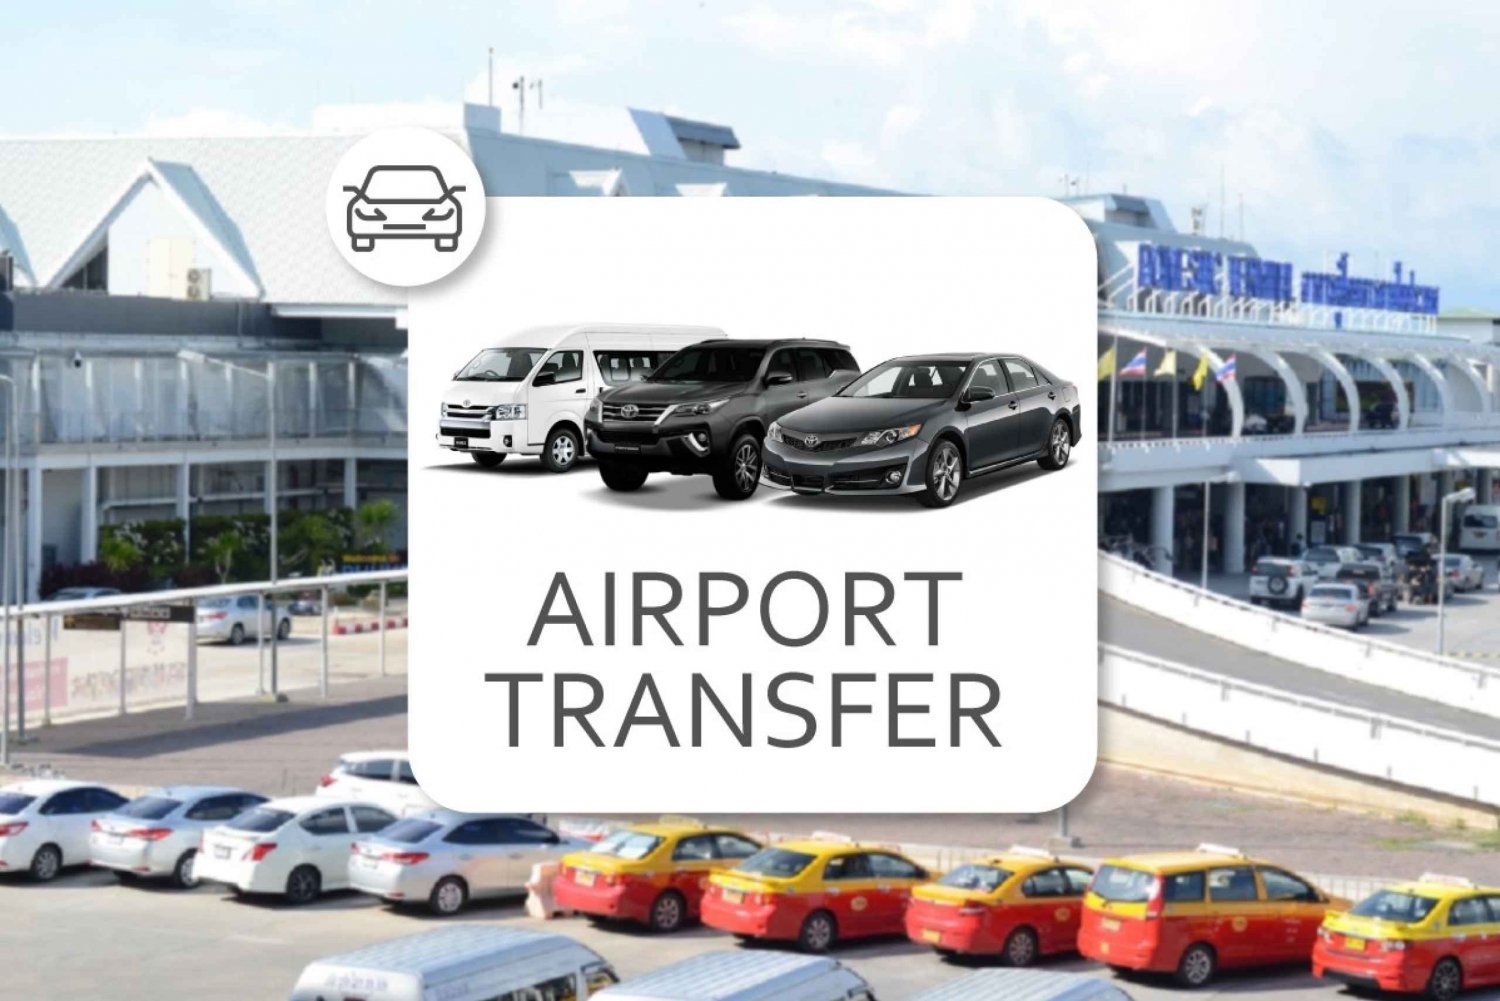 Phuket: Private 1-Way Airport Transfer from/to Hotel